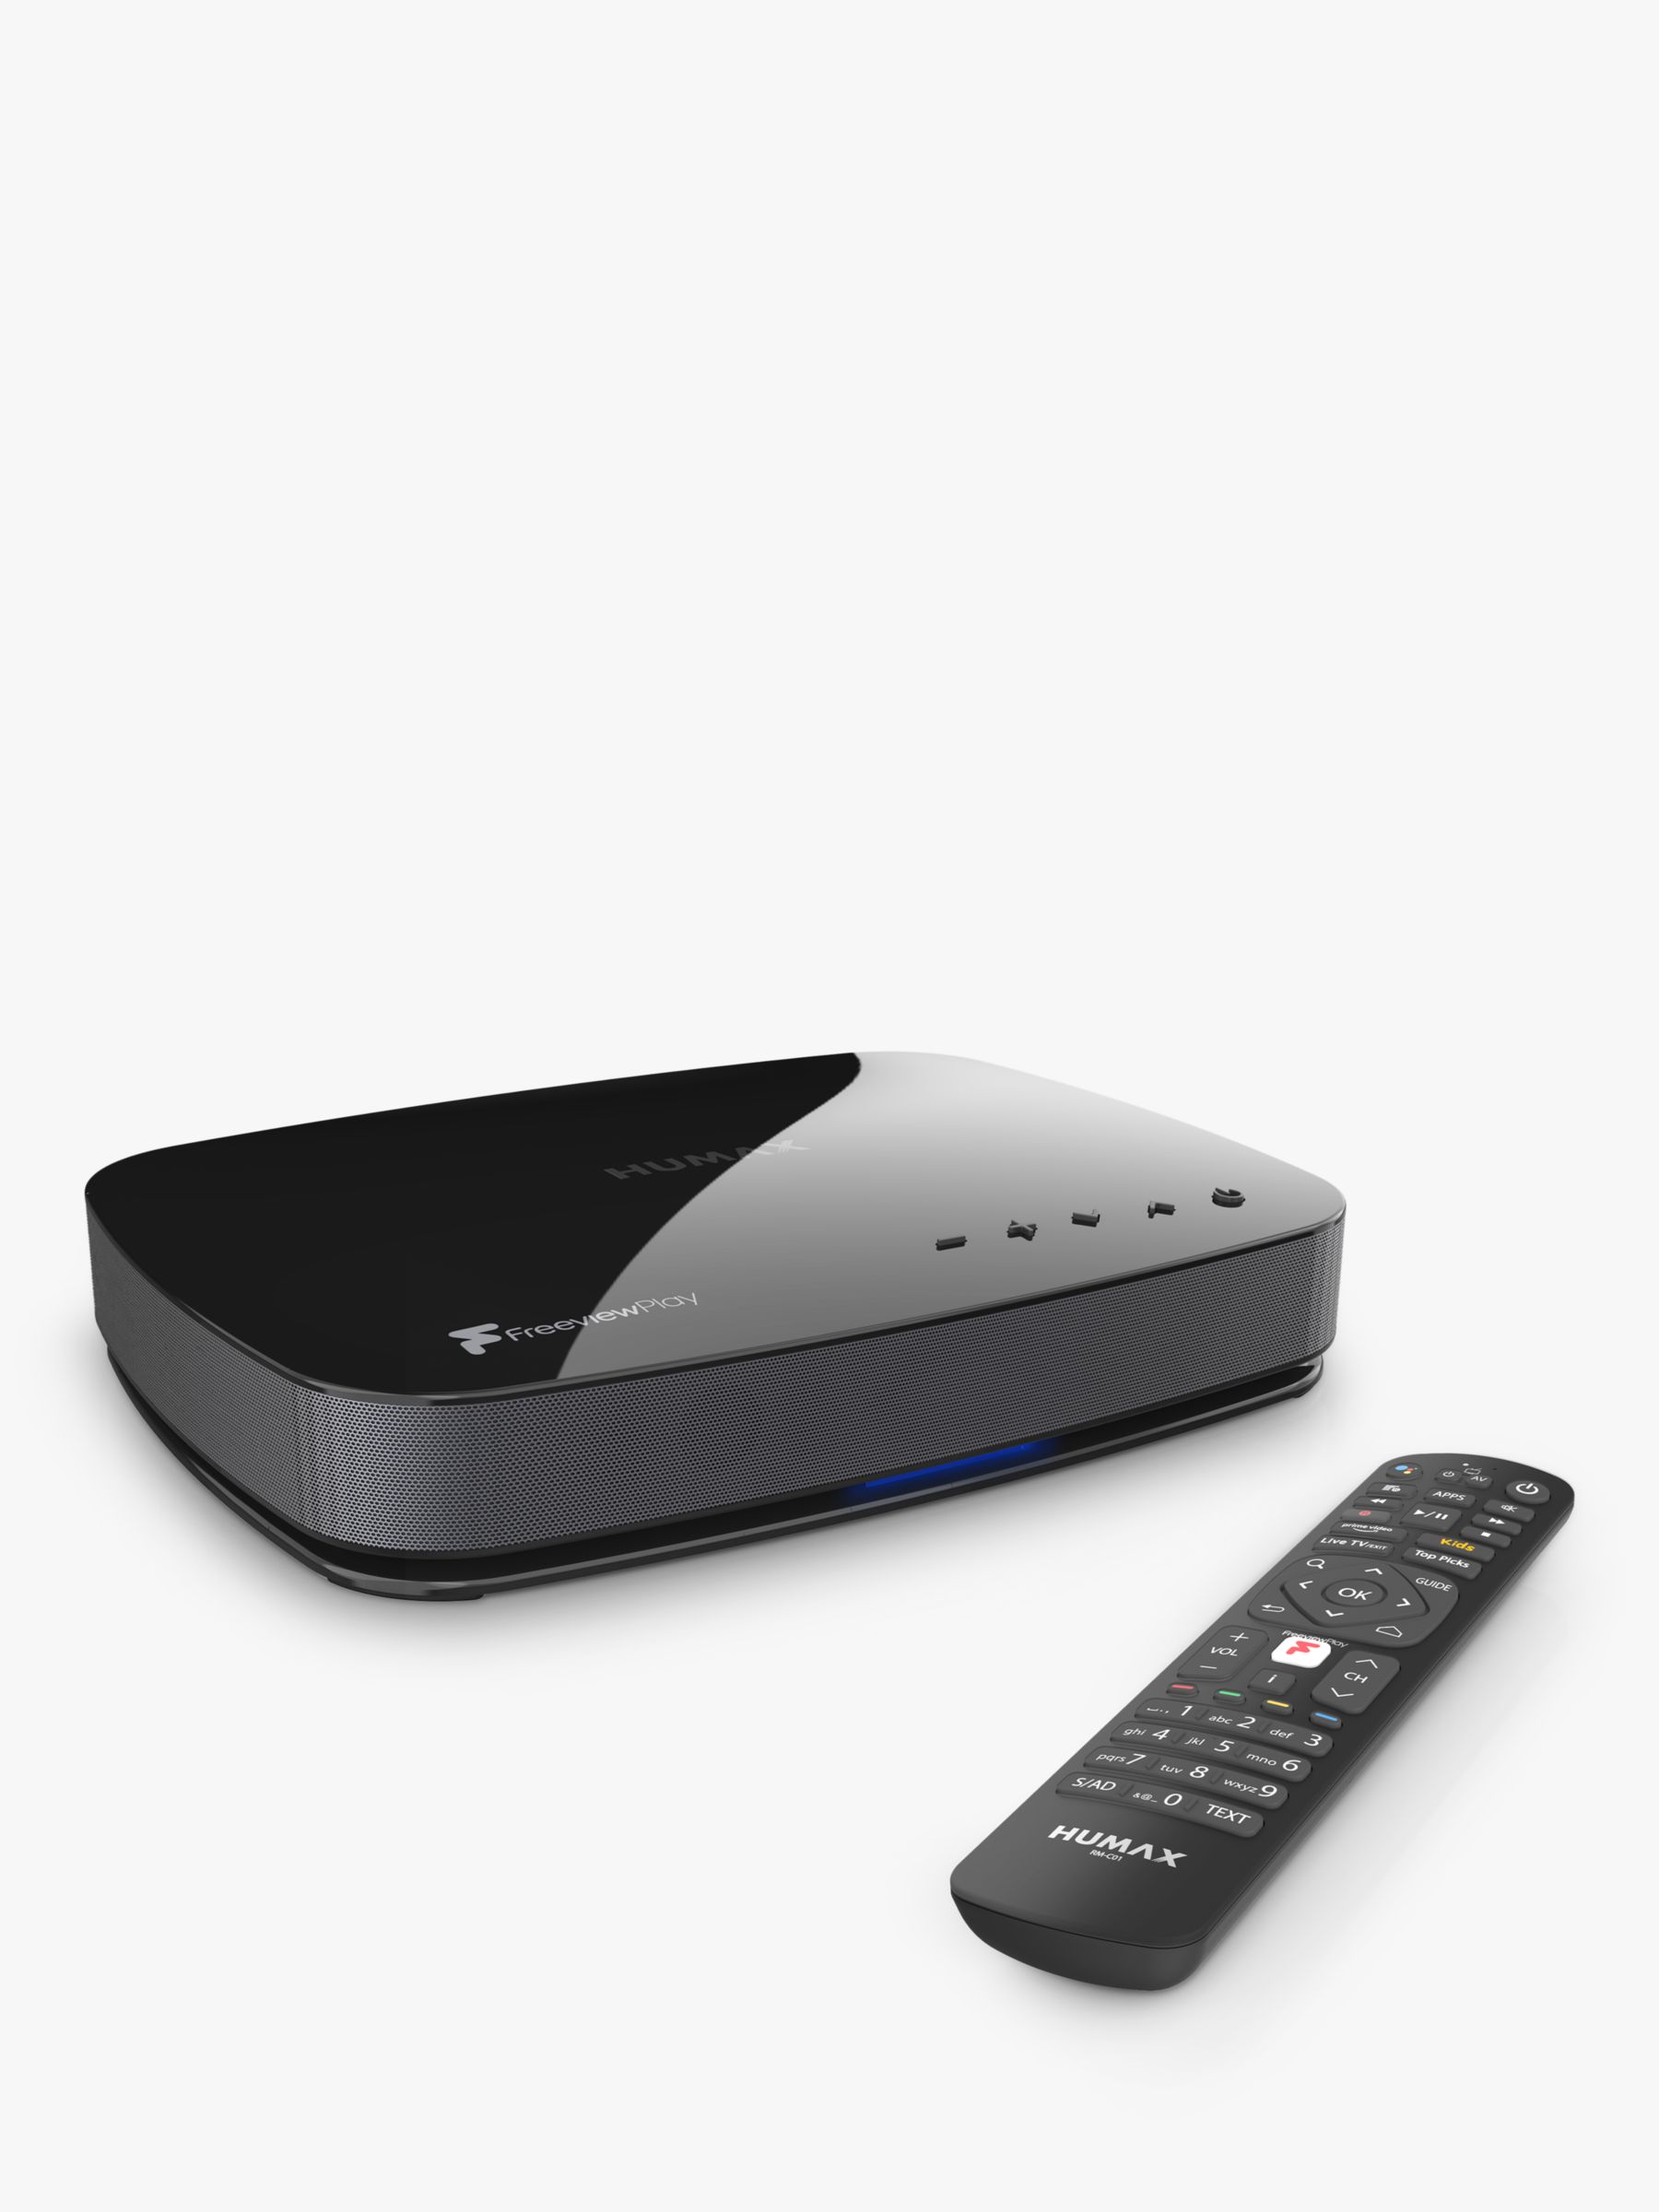 Humax brings its Android TV 4K streaming box to the UK – SEENIT